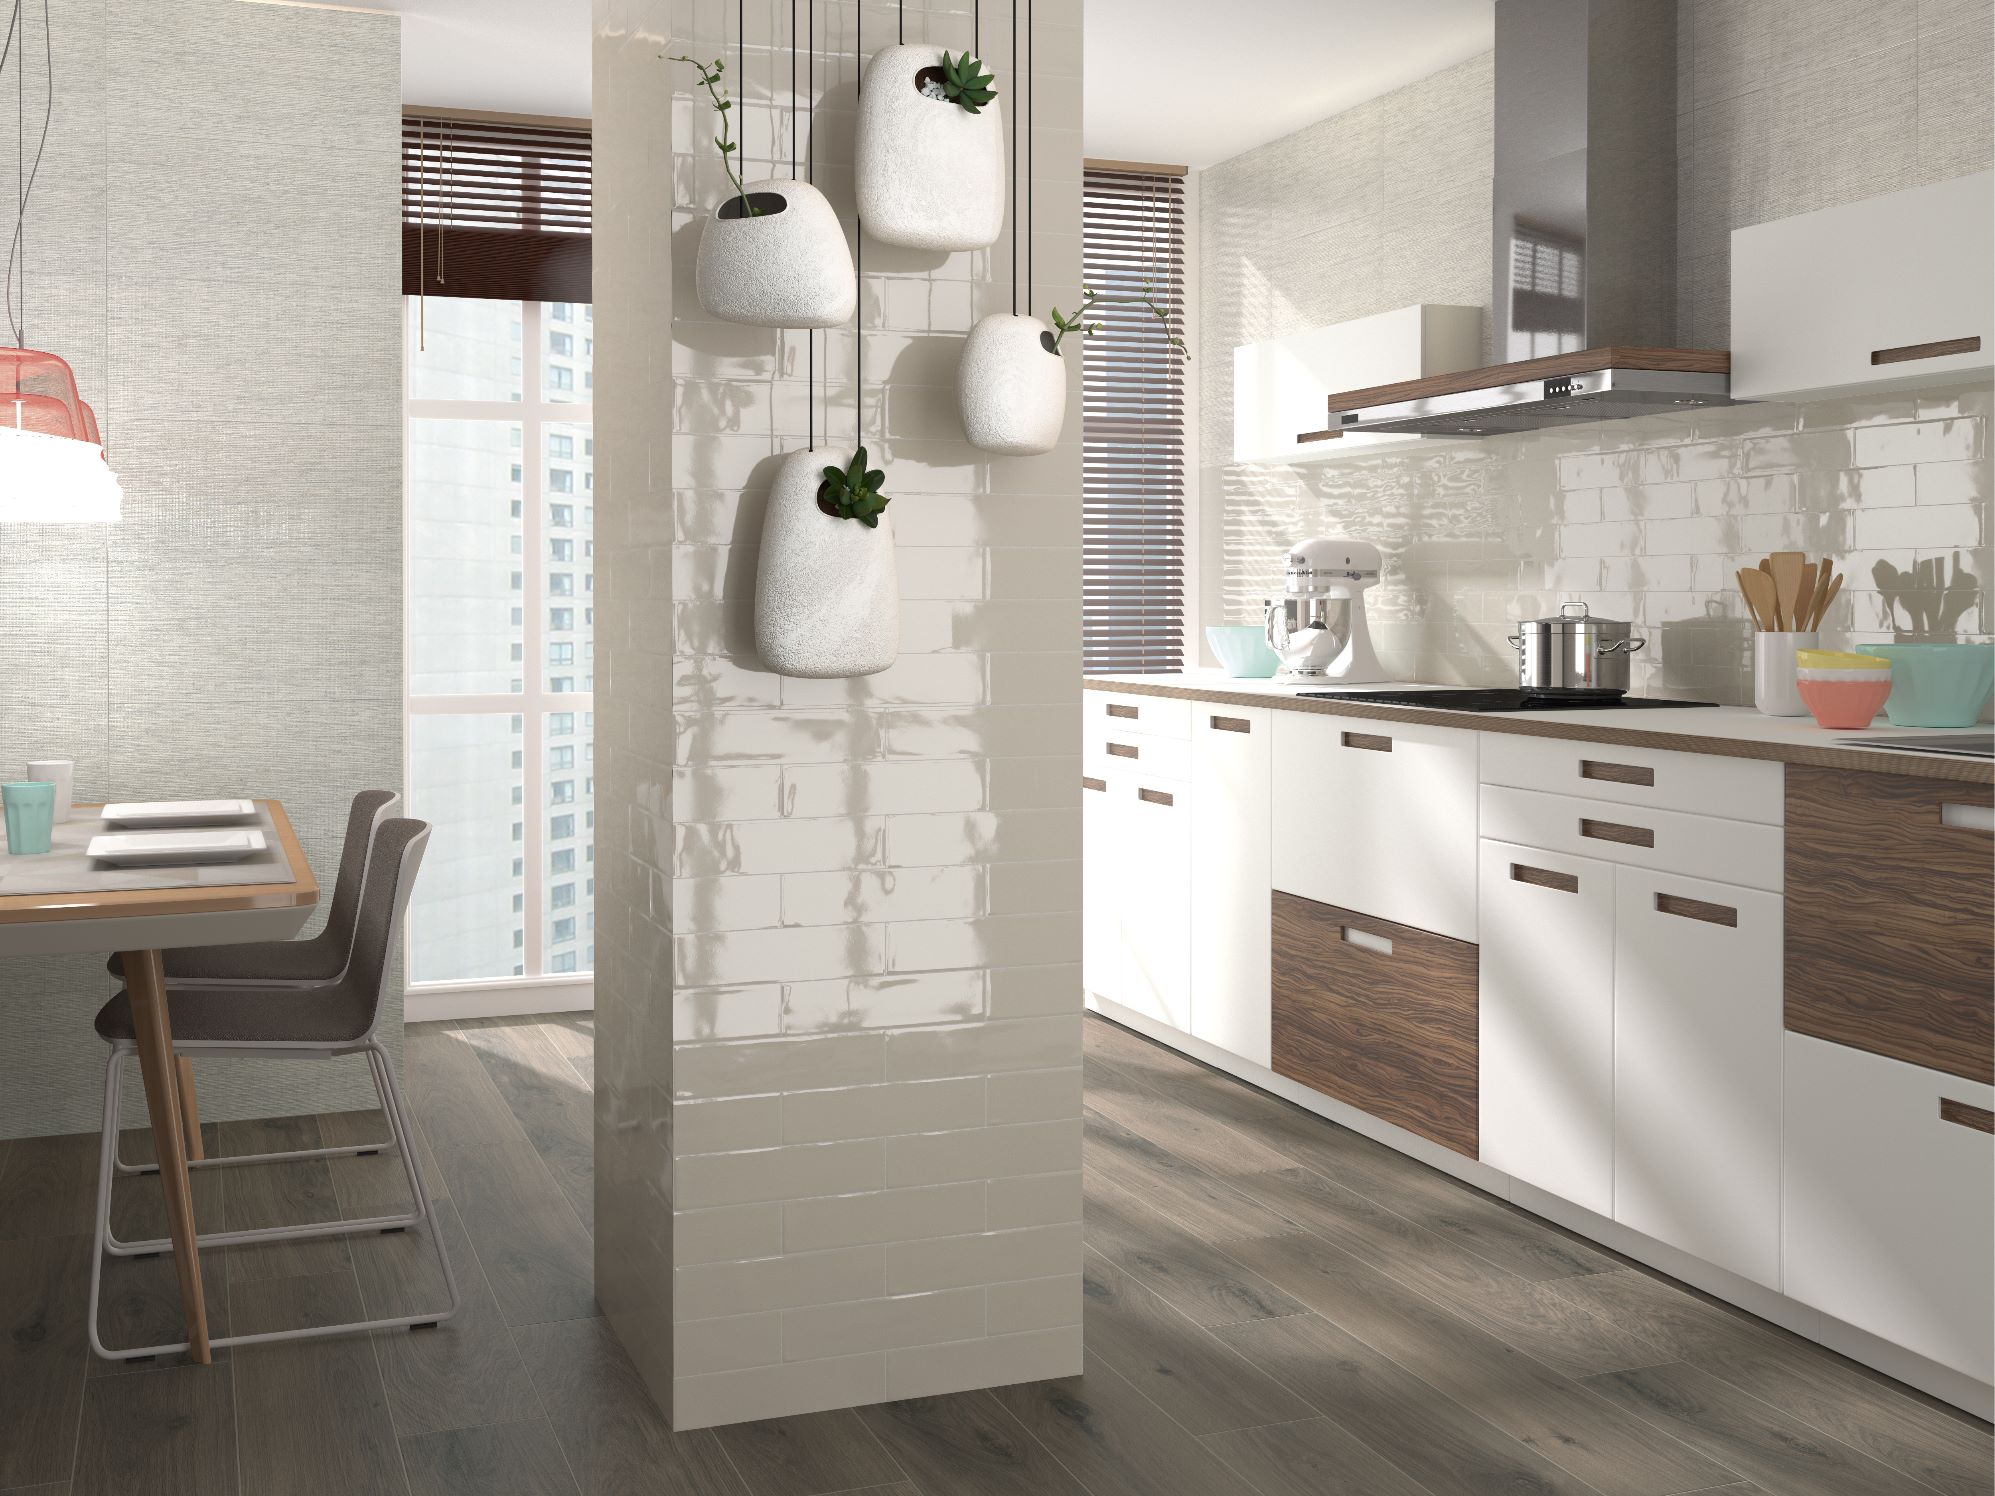 COSMOPOLITAN_5_G | Mohawk Tile and Marble